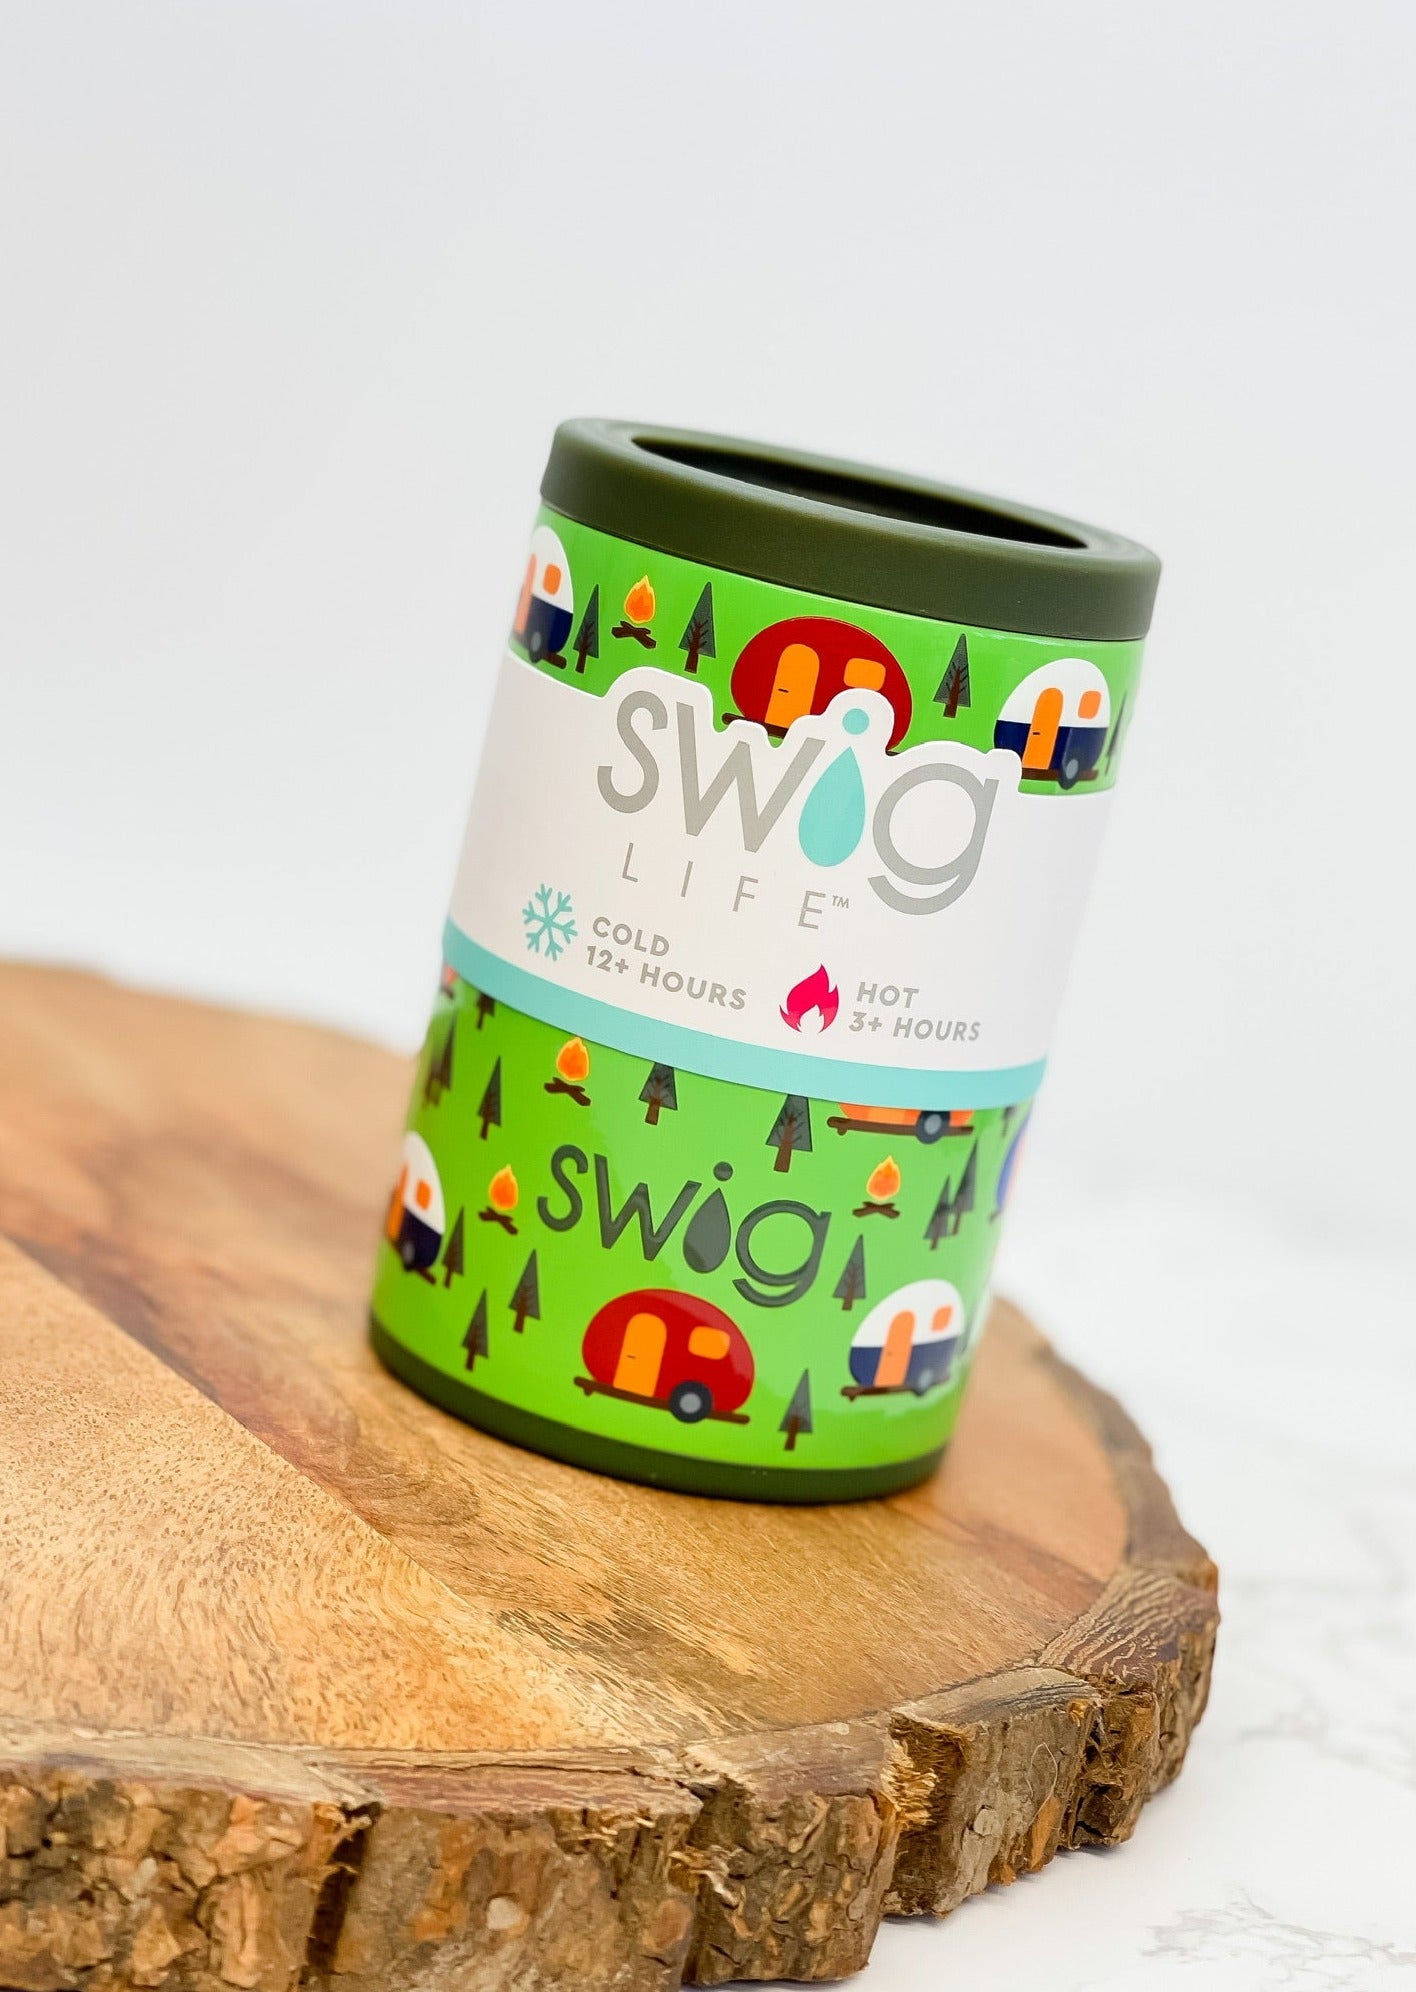 Swig Party Animal Can Combo Cooler 12oz